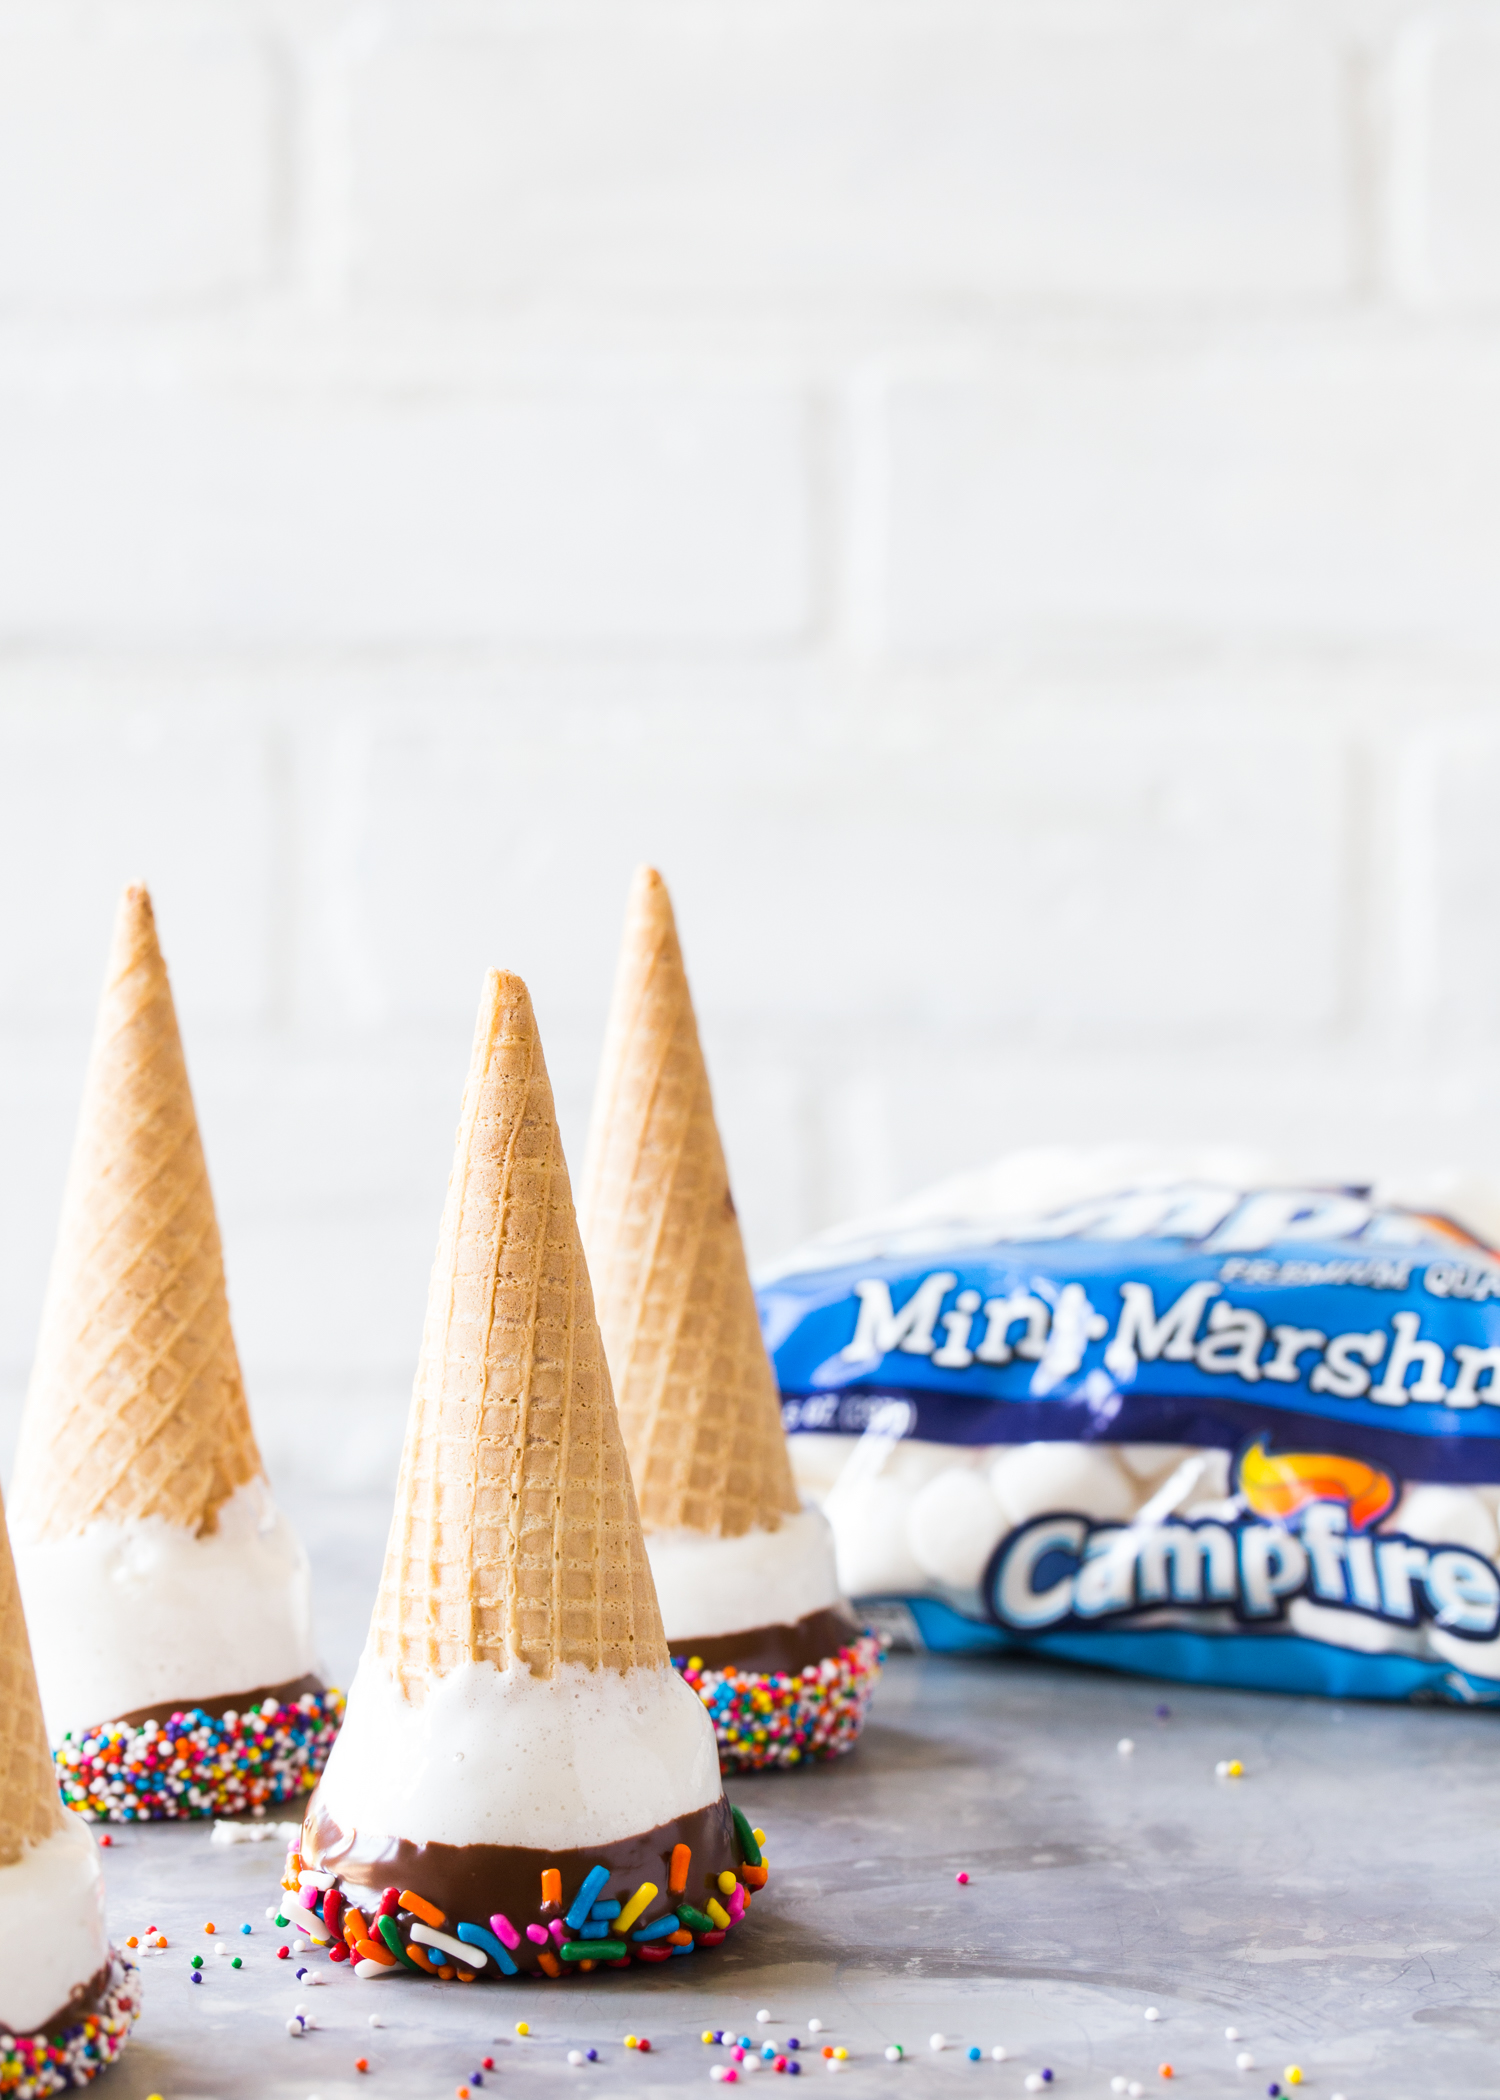 Marshmallow Dipped Ice Cream Cones made with melted marshmallows, chocolate, and sprinkles!